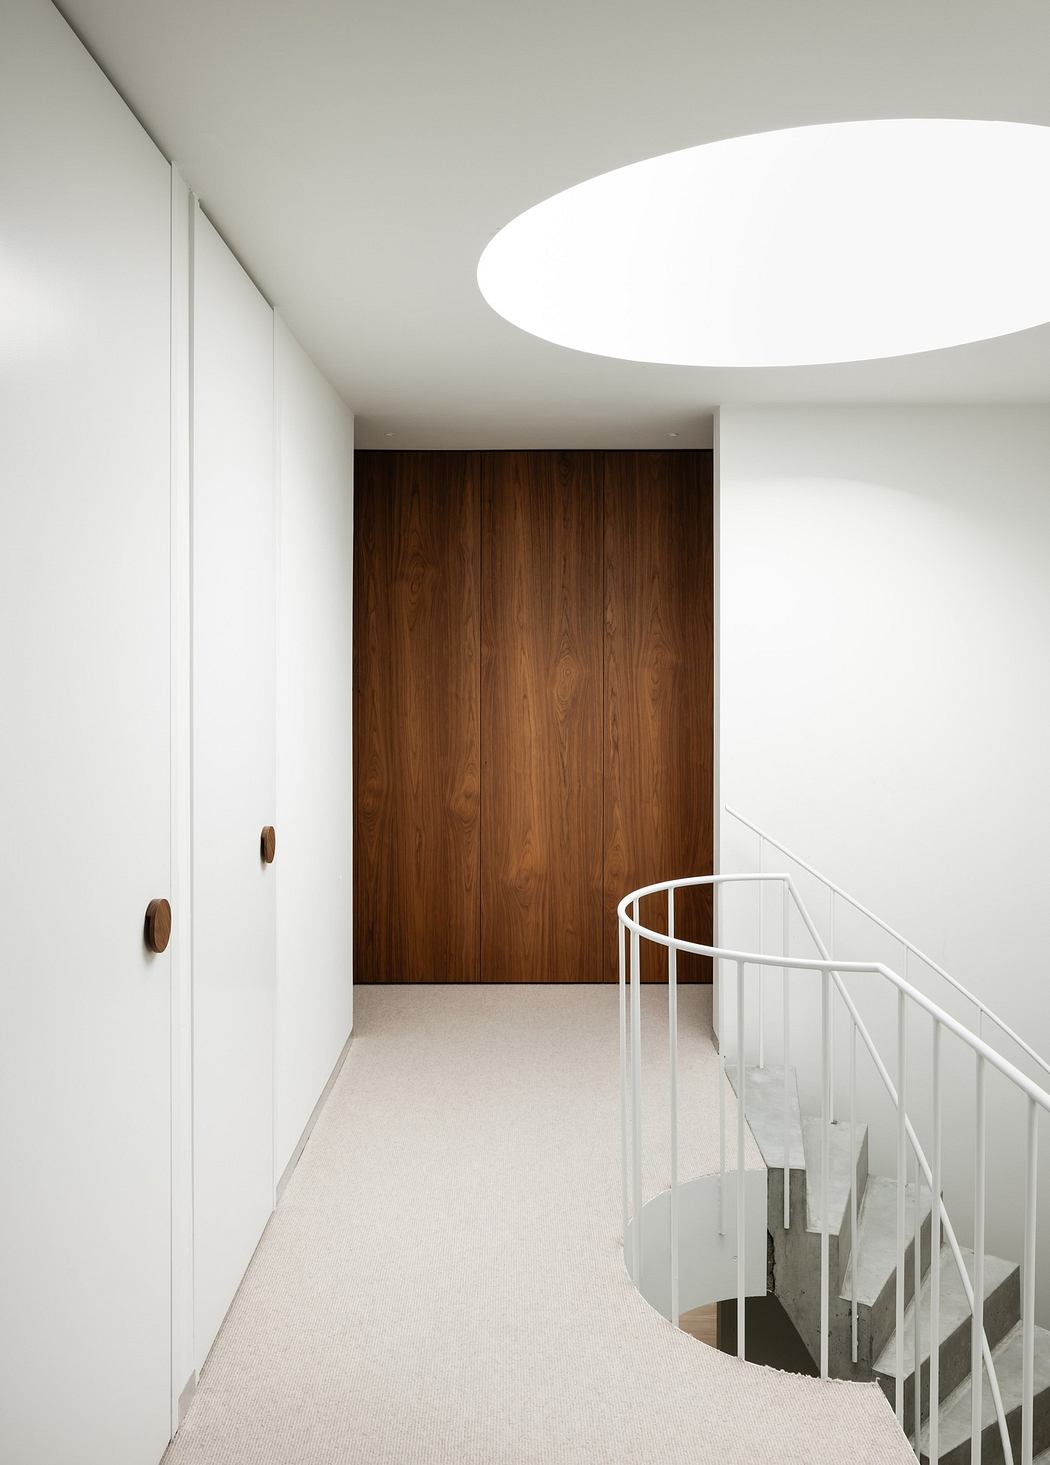 Minimalist hallway with a wooden door, white walls, and circular skylight